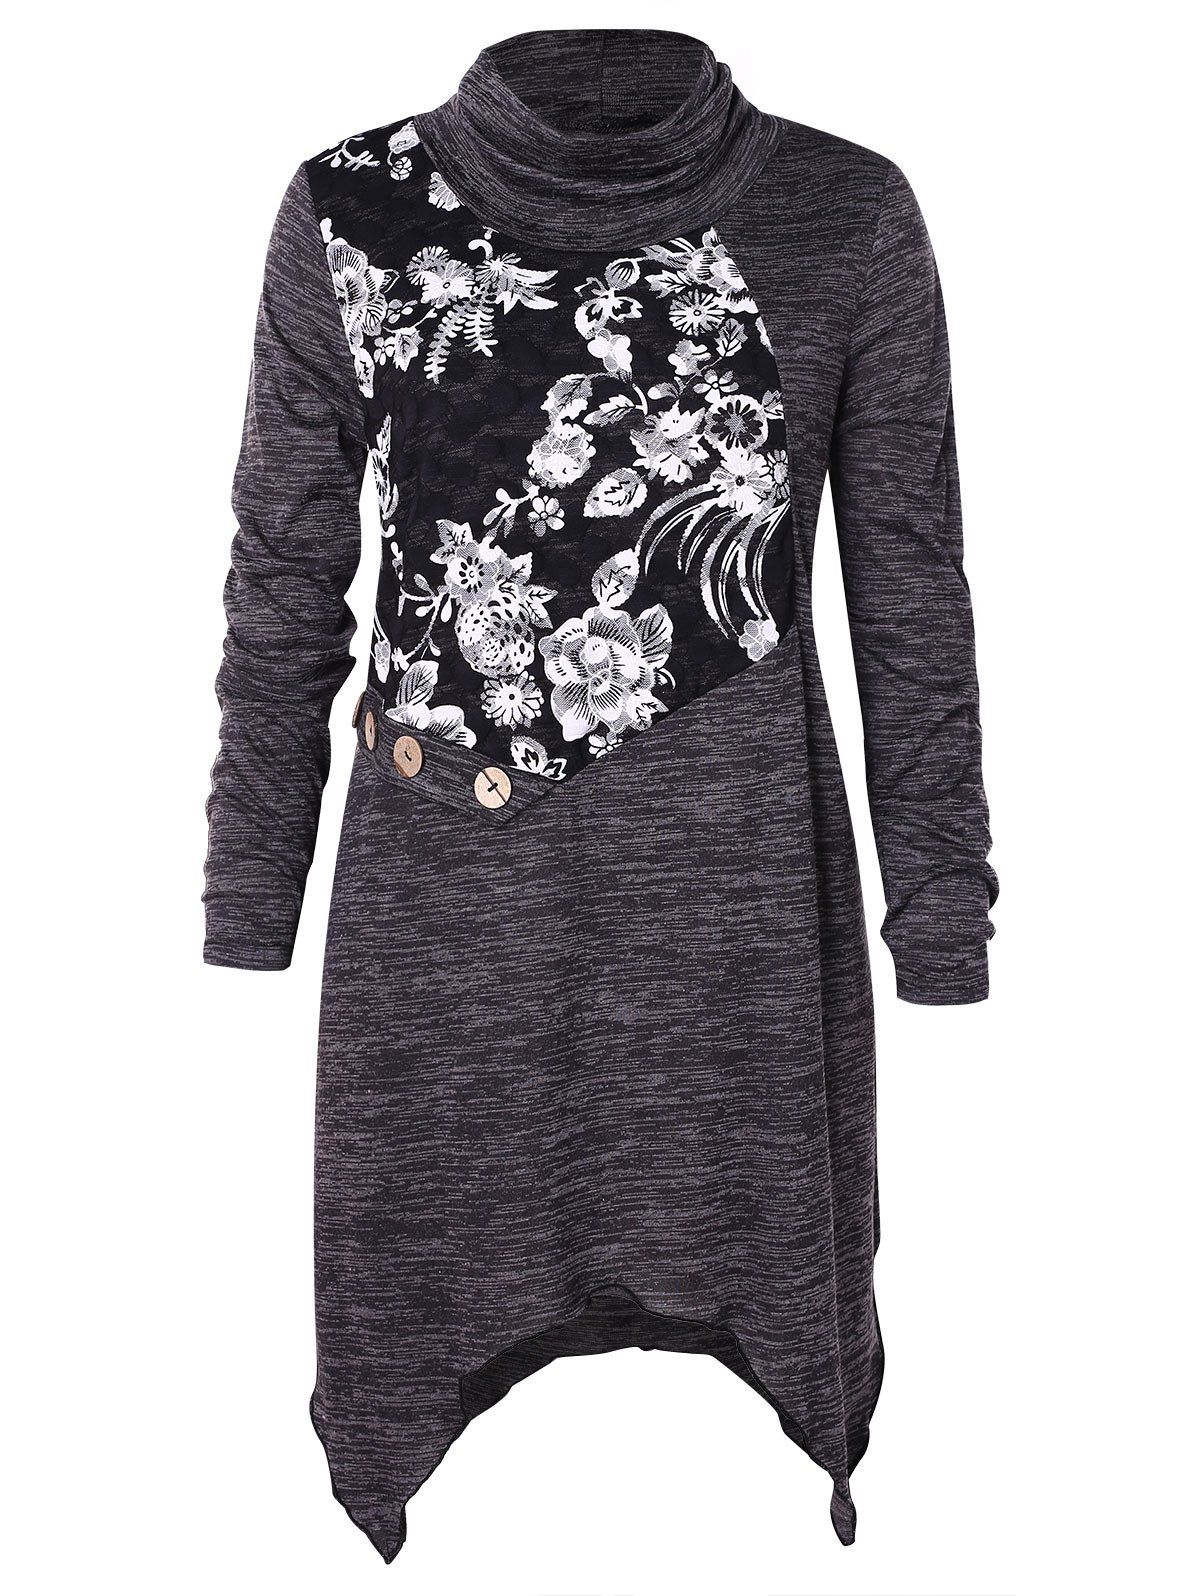 Plus Size Cowl Neck Floral Marled T-shirt